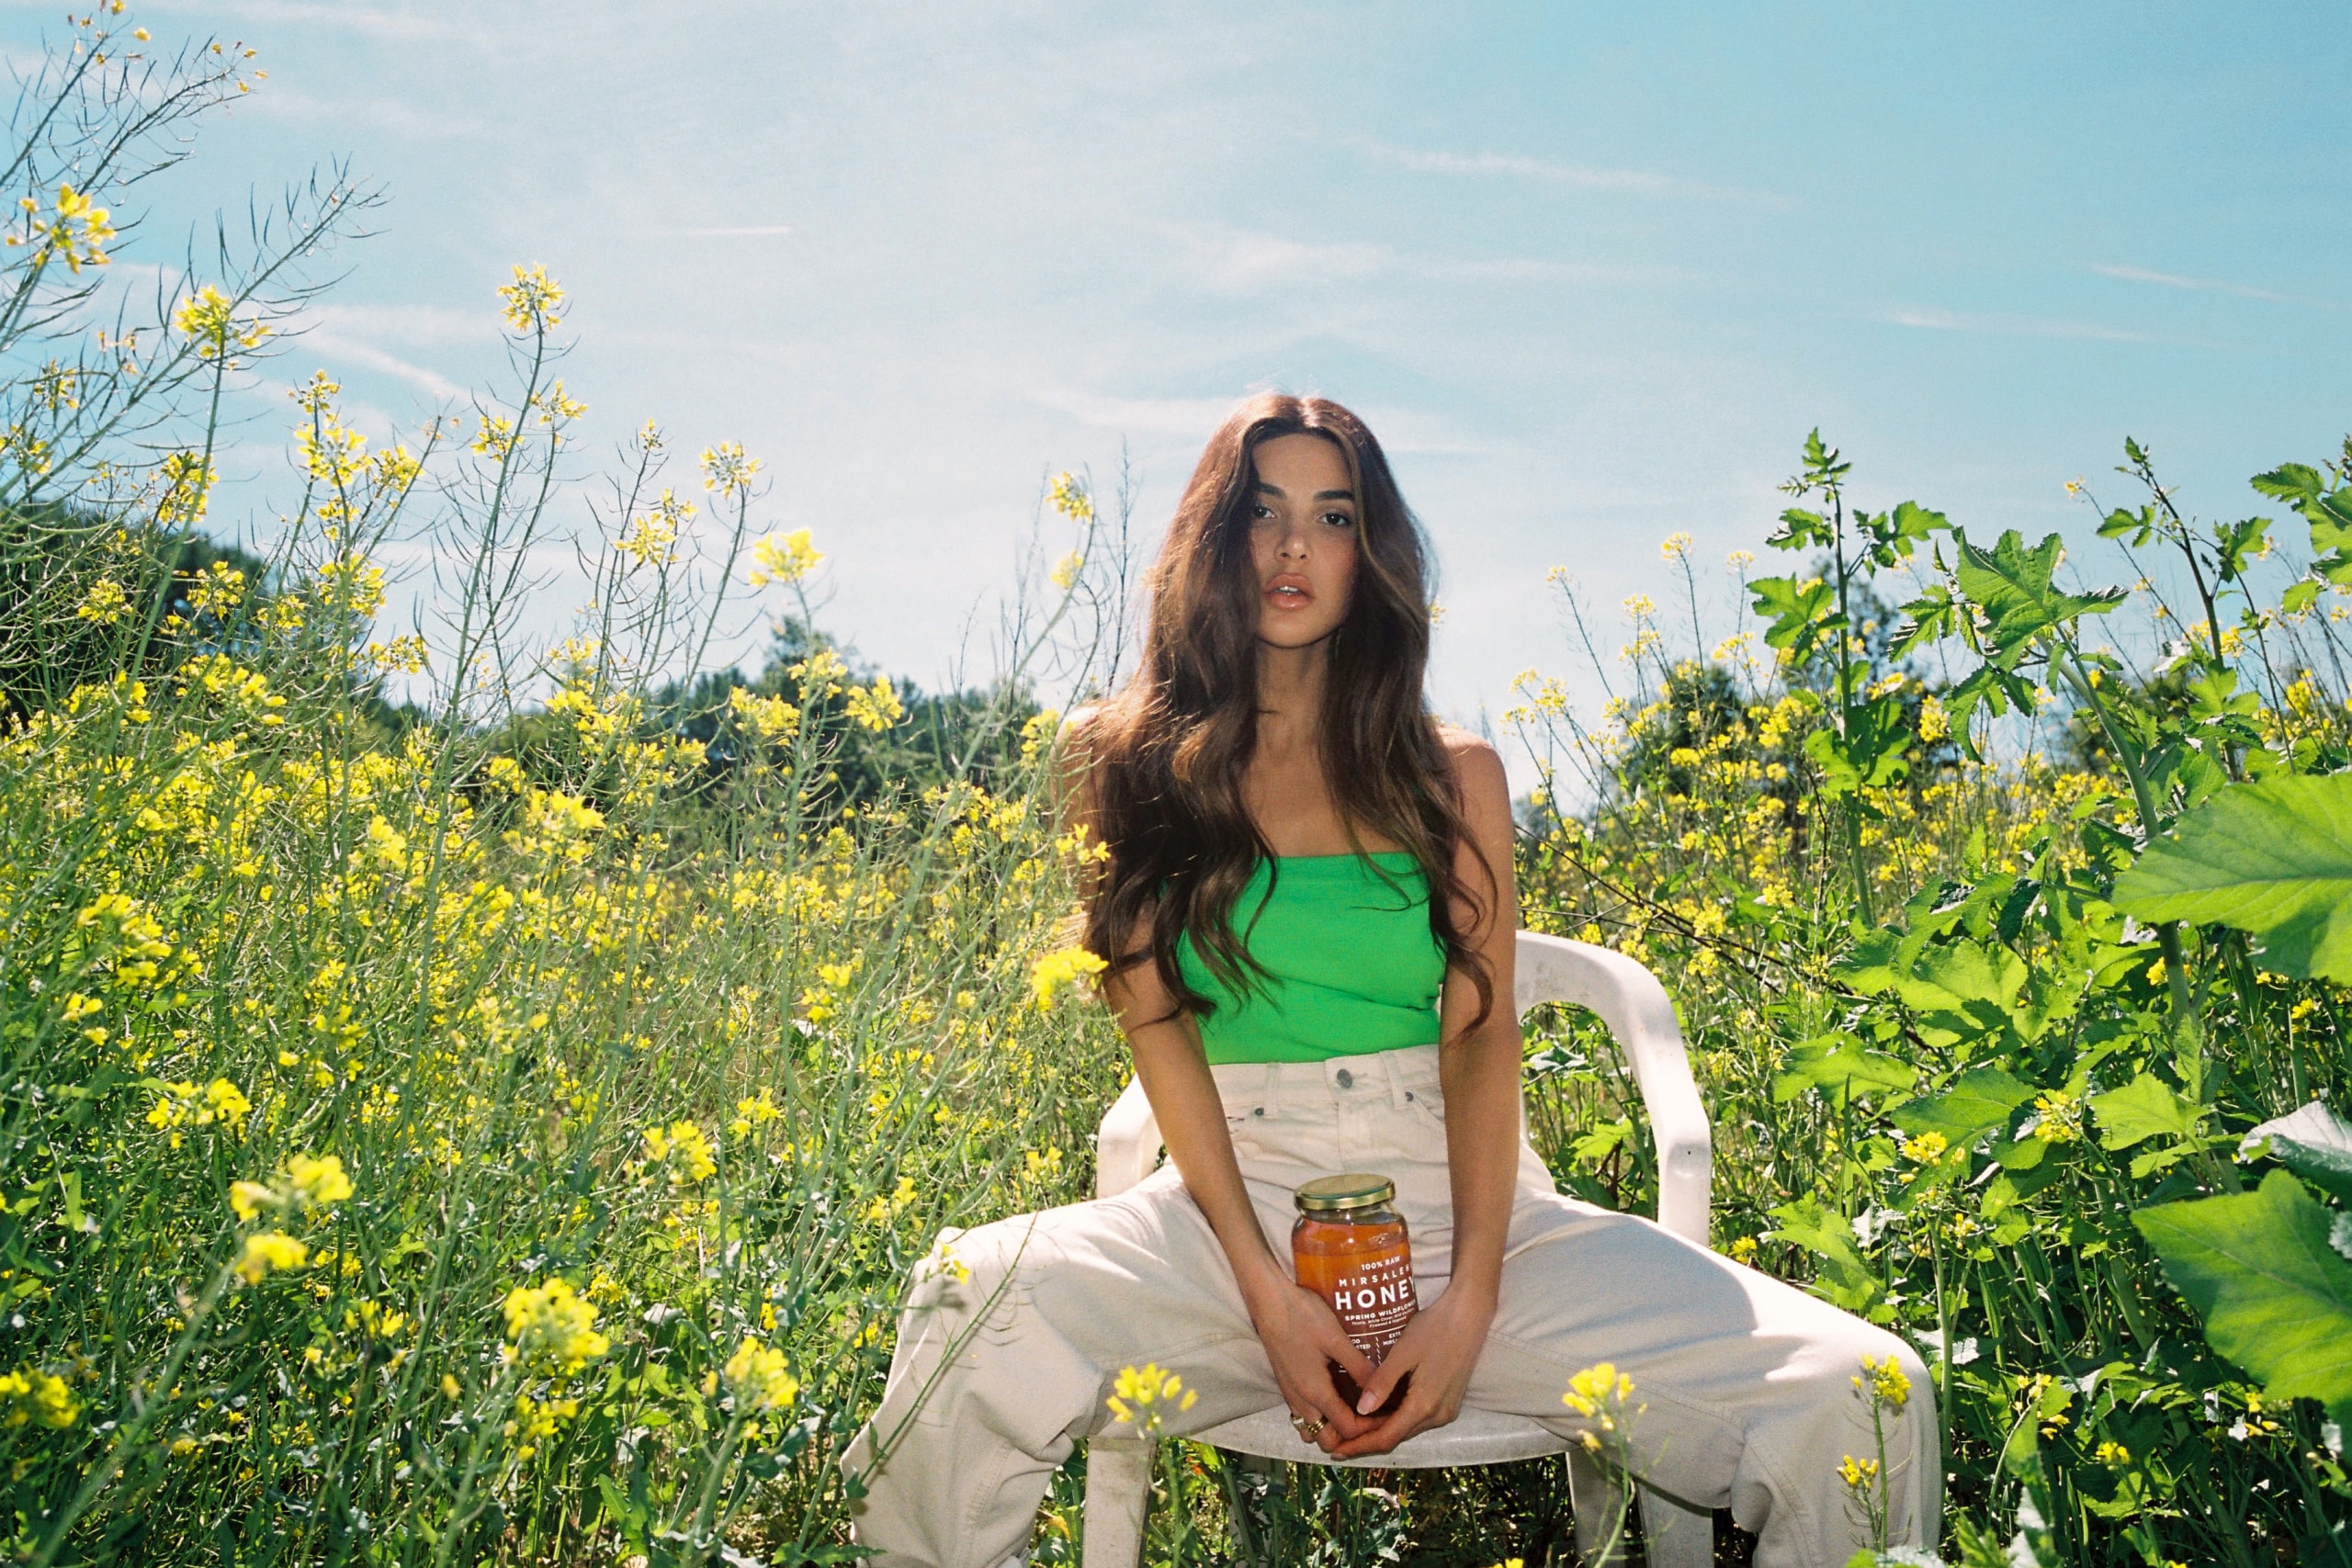 Gisou Hair Care Brand UK Launch Founder Interview Honey Bees Negin Mirsalehi Oil Mask 